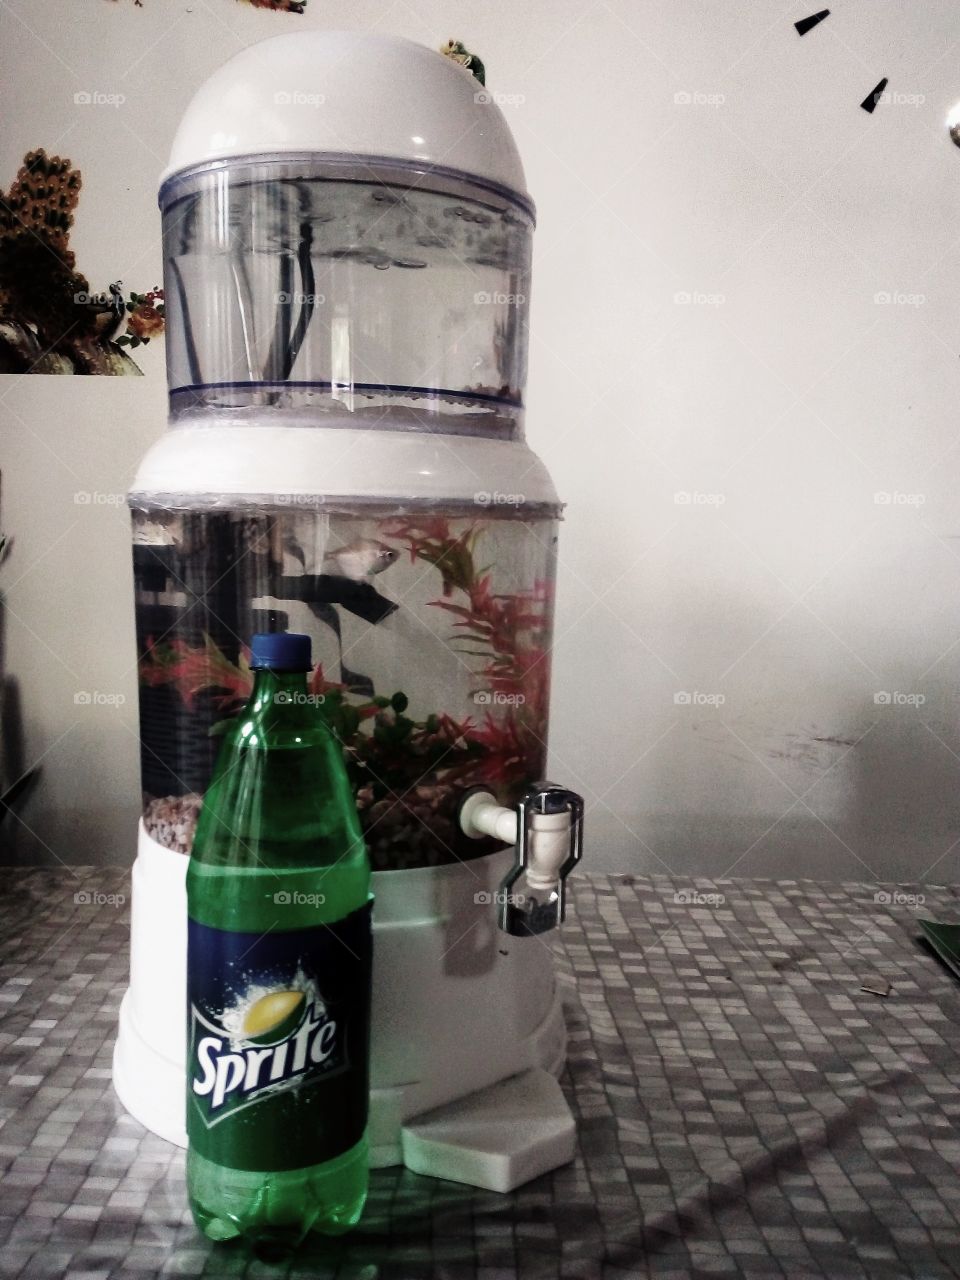 Sprites for thirsty